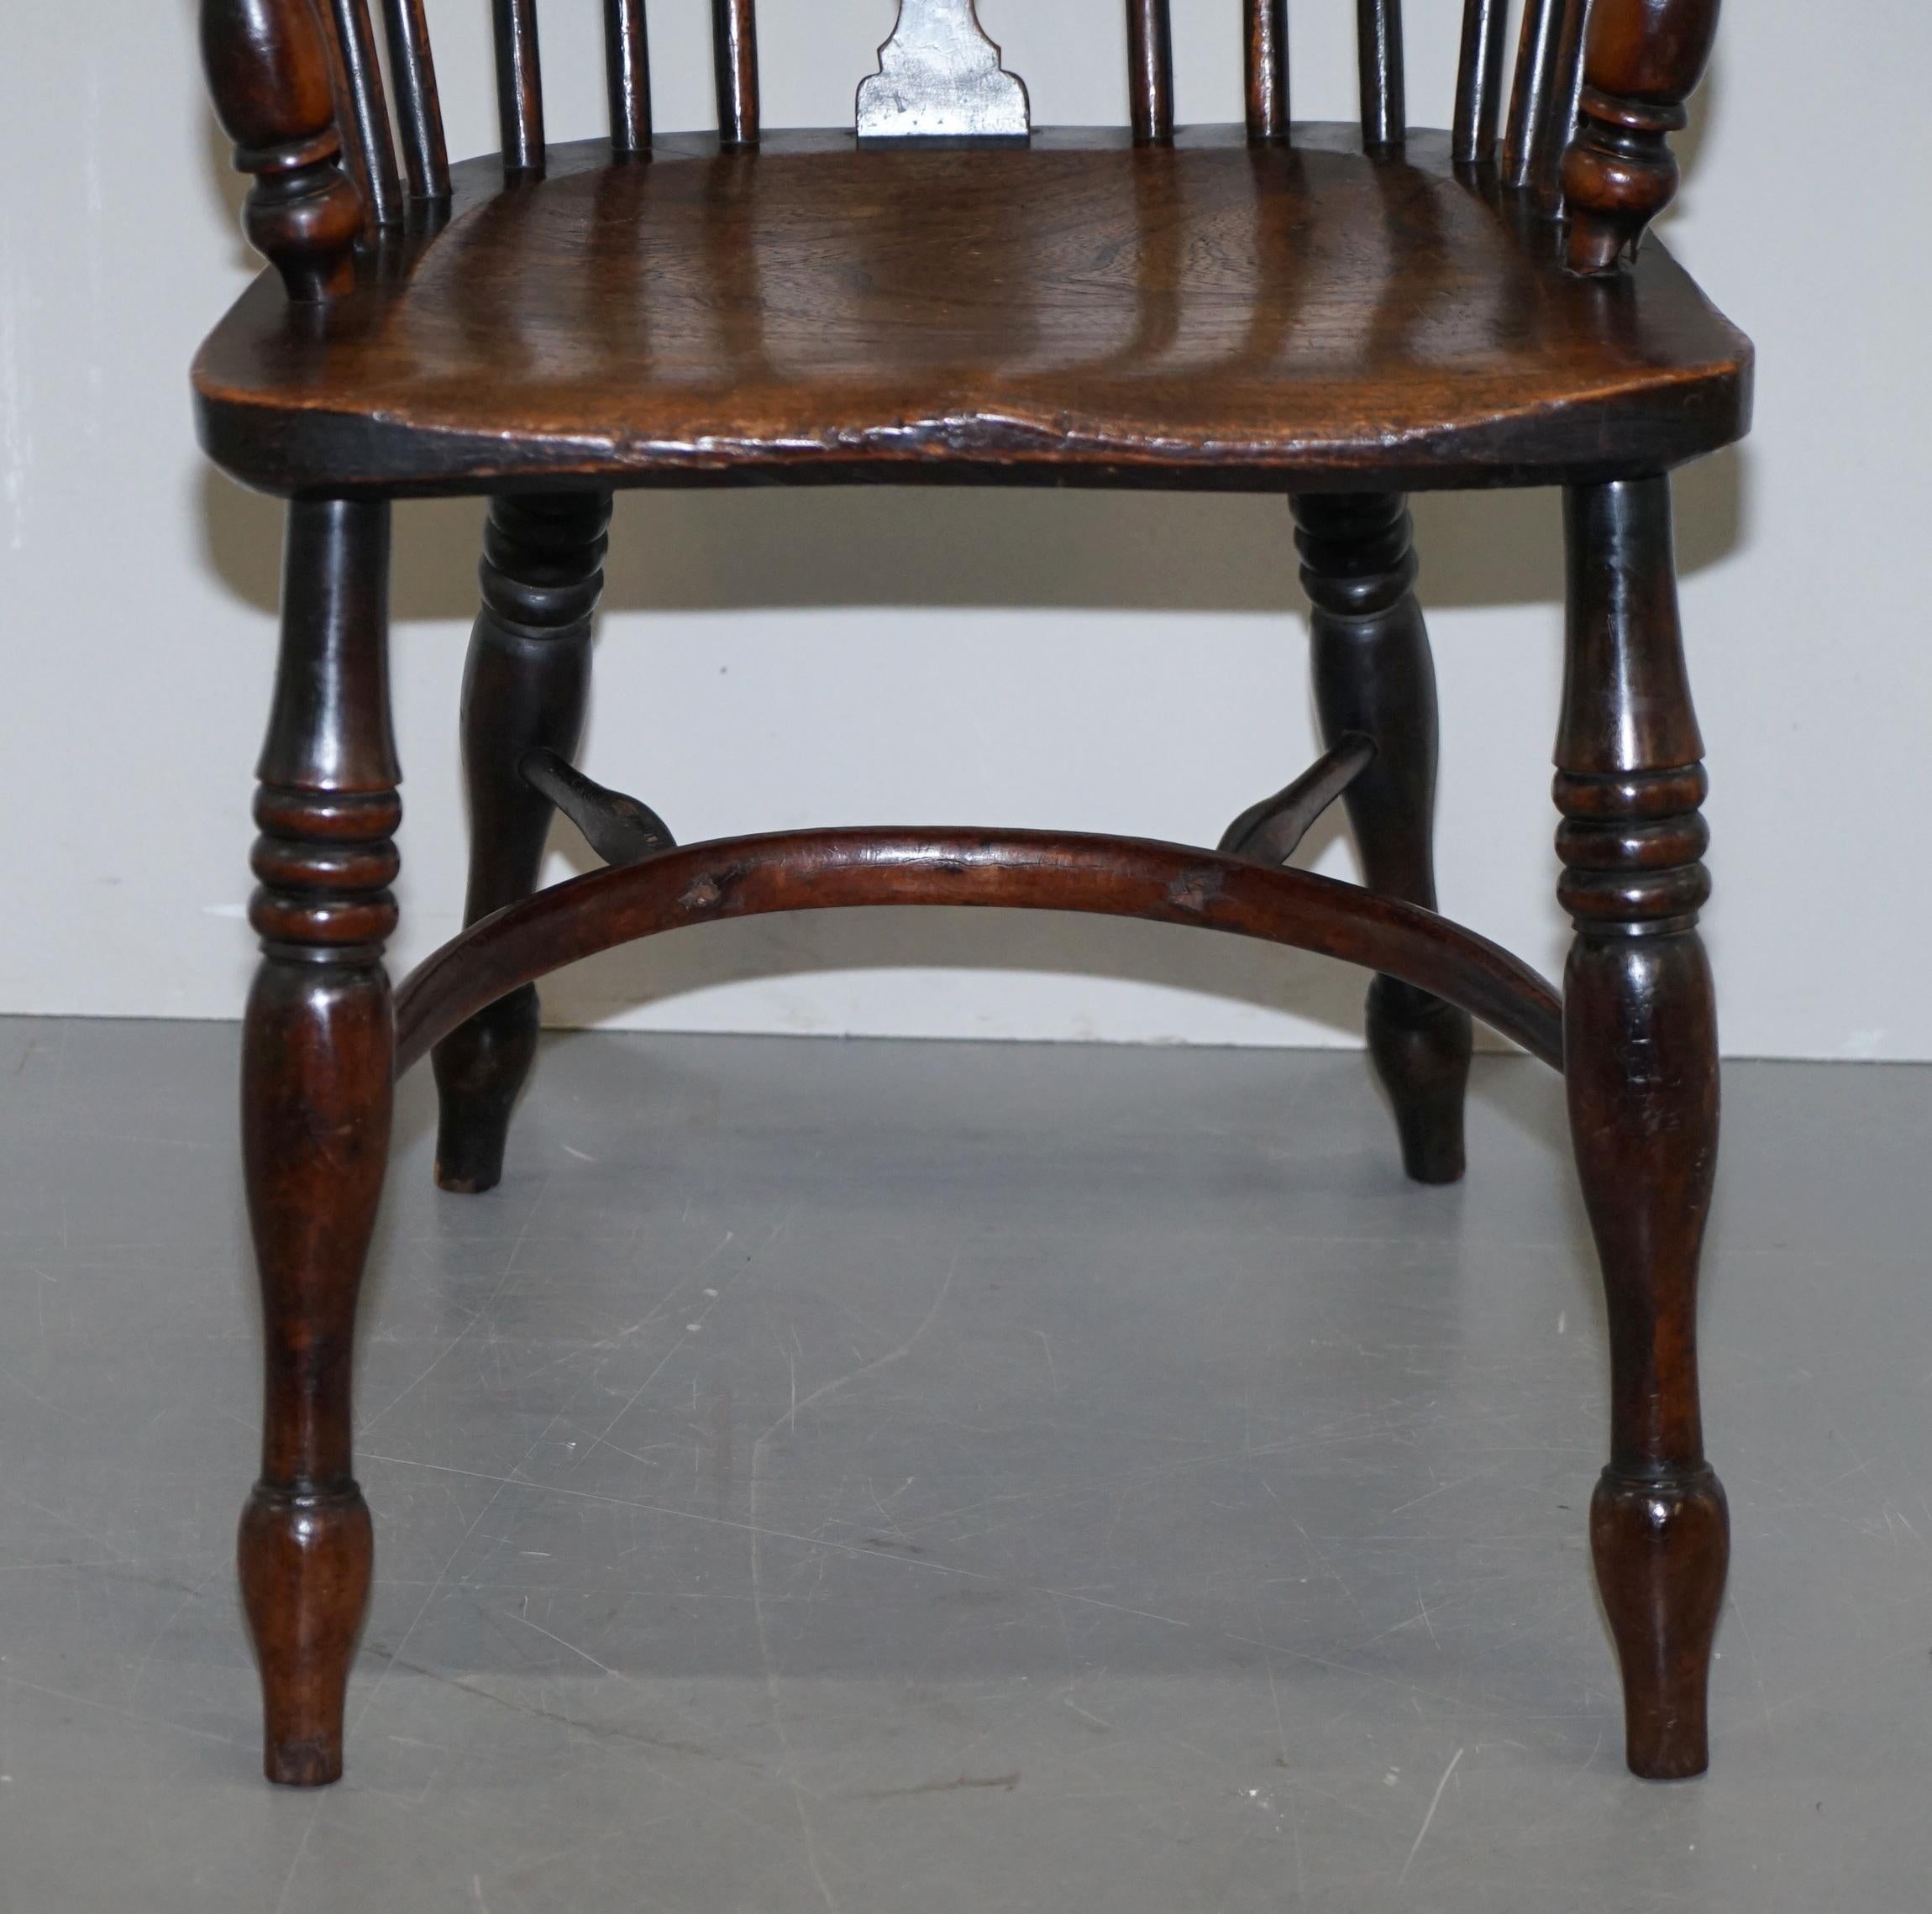 Pair of Burr Yew Wood and Elm Windsor Armchairs circa 1860 English Country House For Sale 2